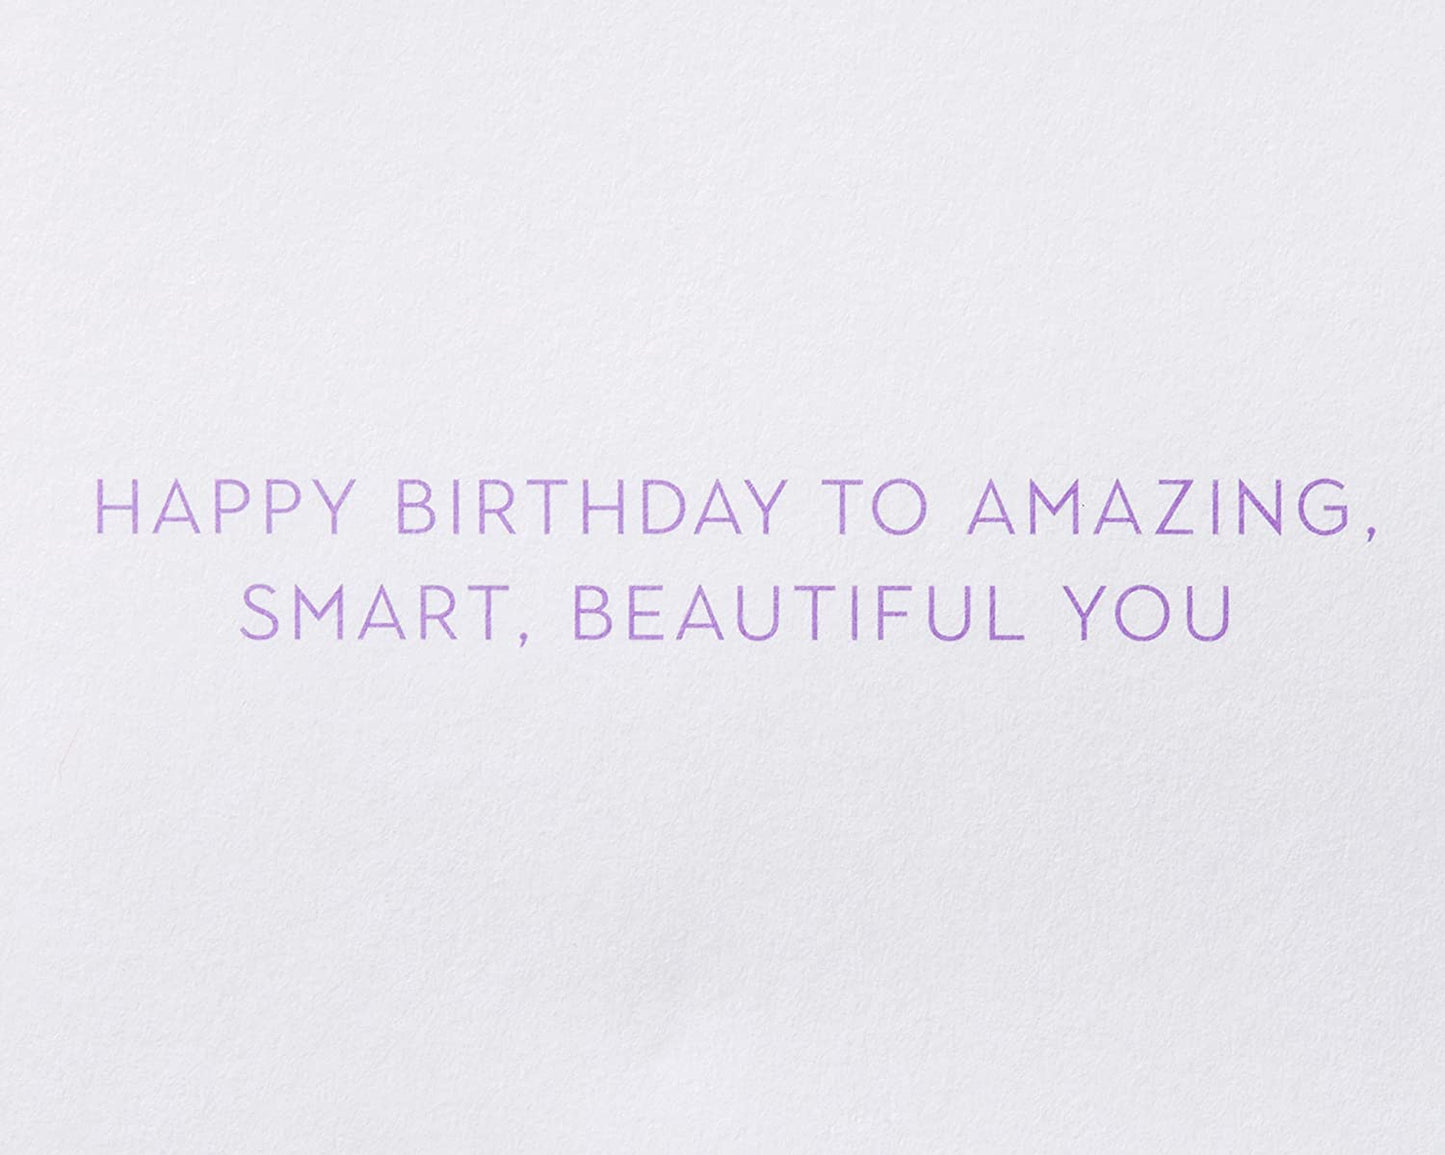 Papyrus 16th Birthday Card for Her (Amazing, Smart, Beautiful You)